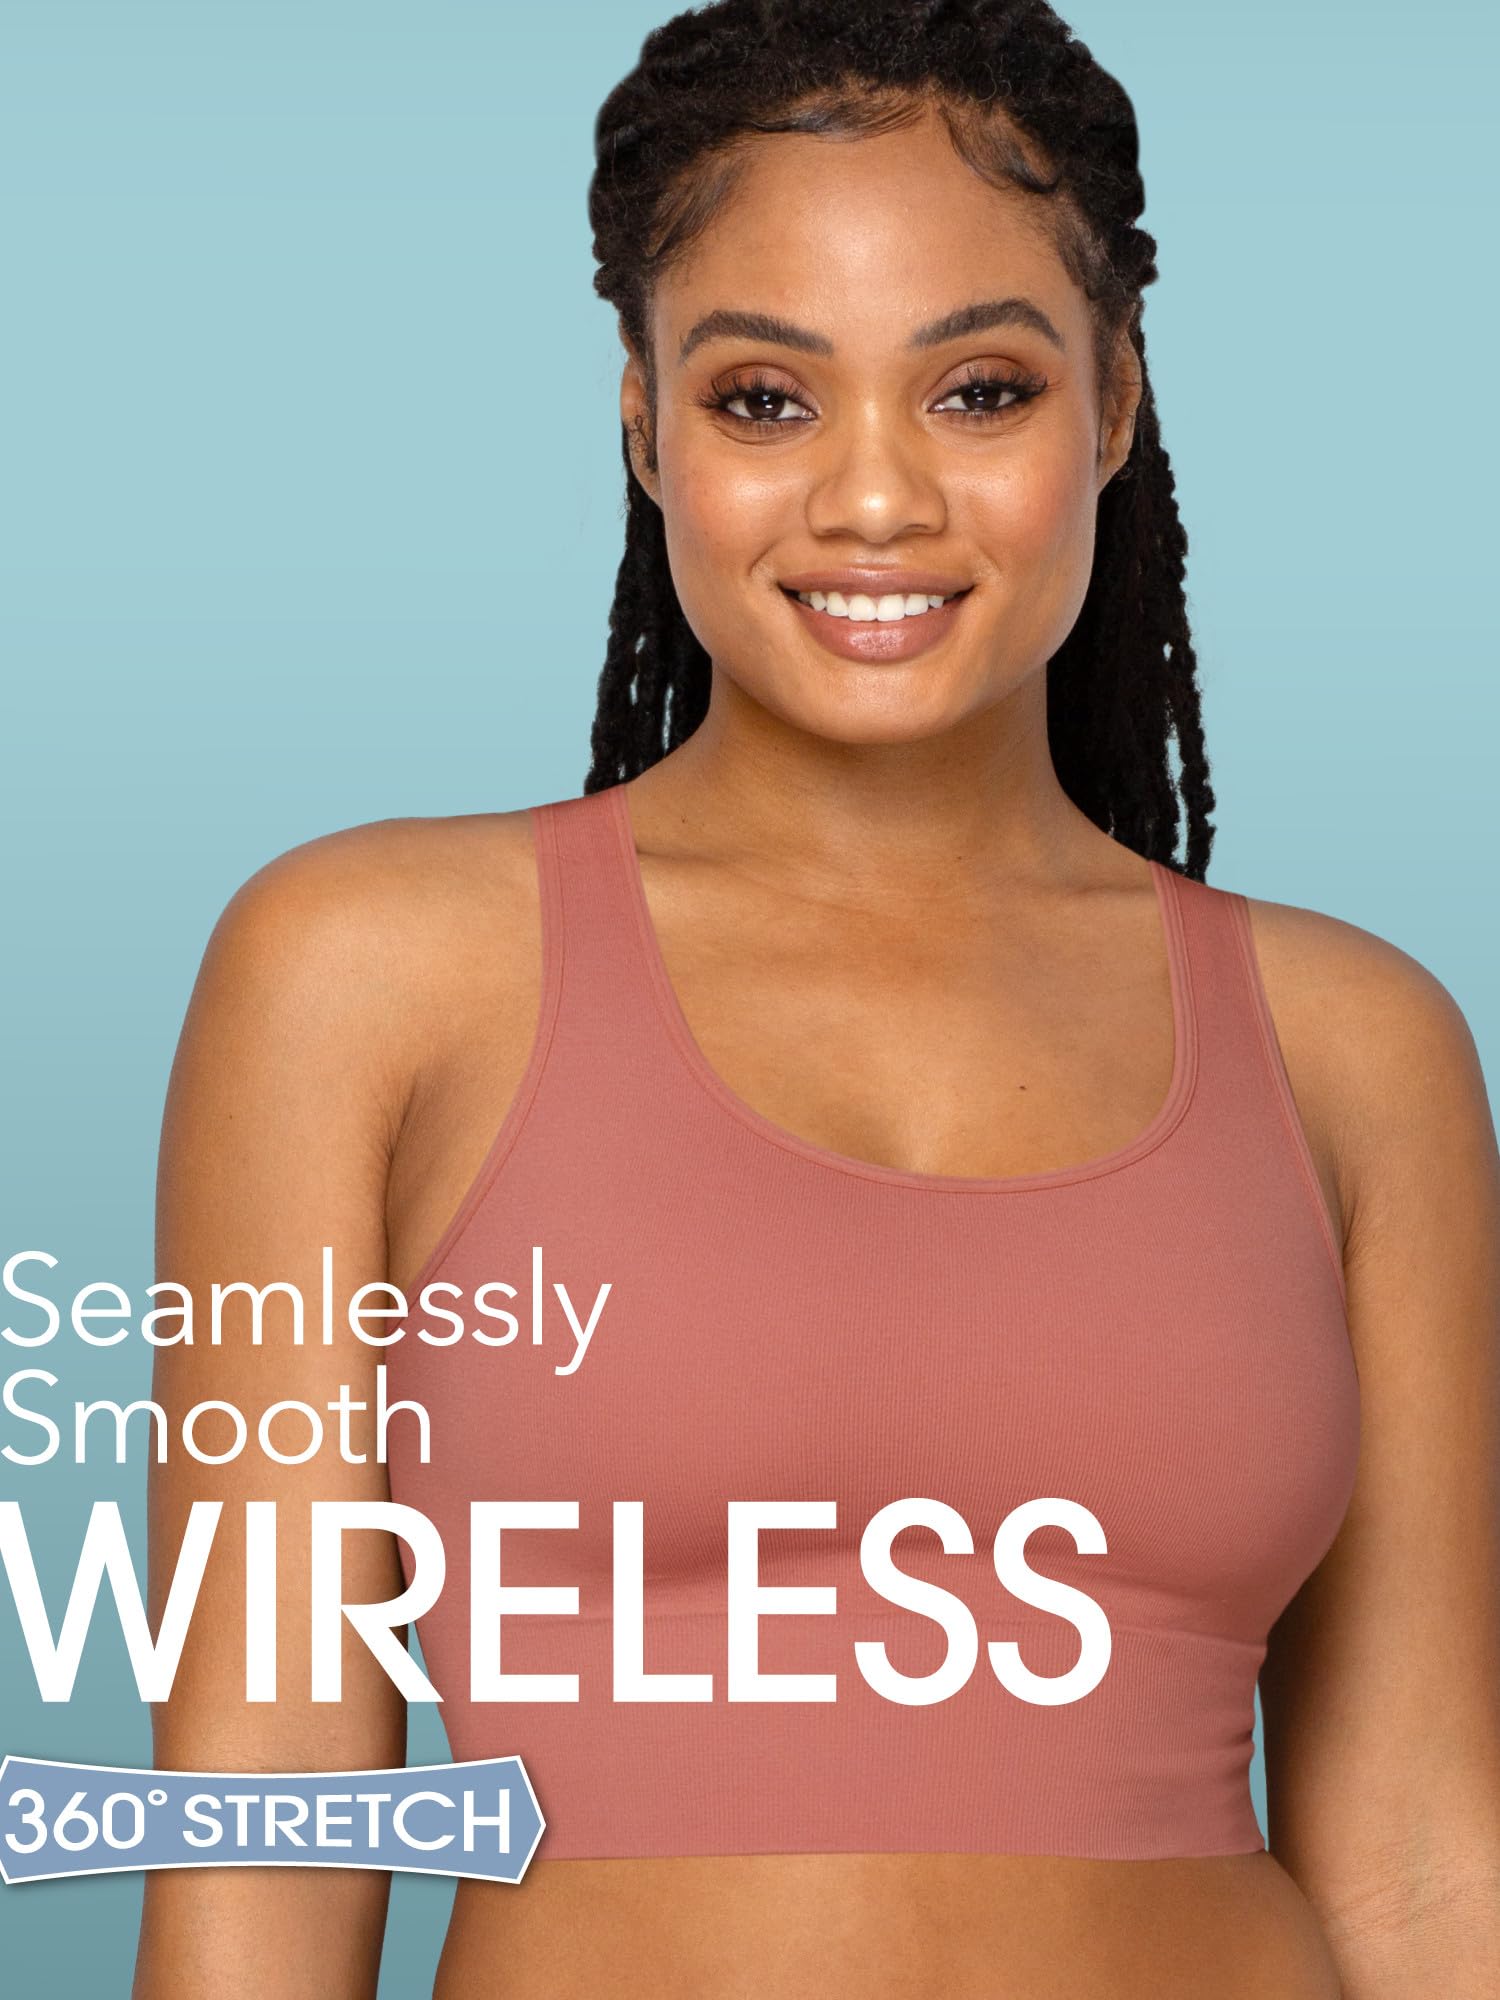 Fruit of the Loom Women's 360 Stretch Longline Sport, Comfortable Wireless Bras, Seamless Full-Coverage for a Natural Shape